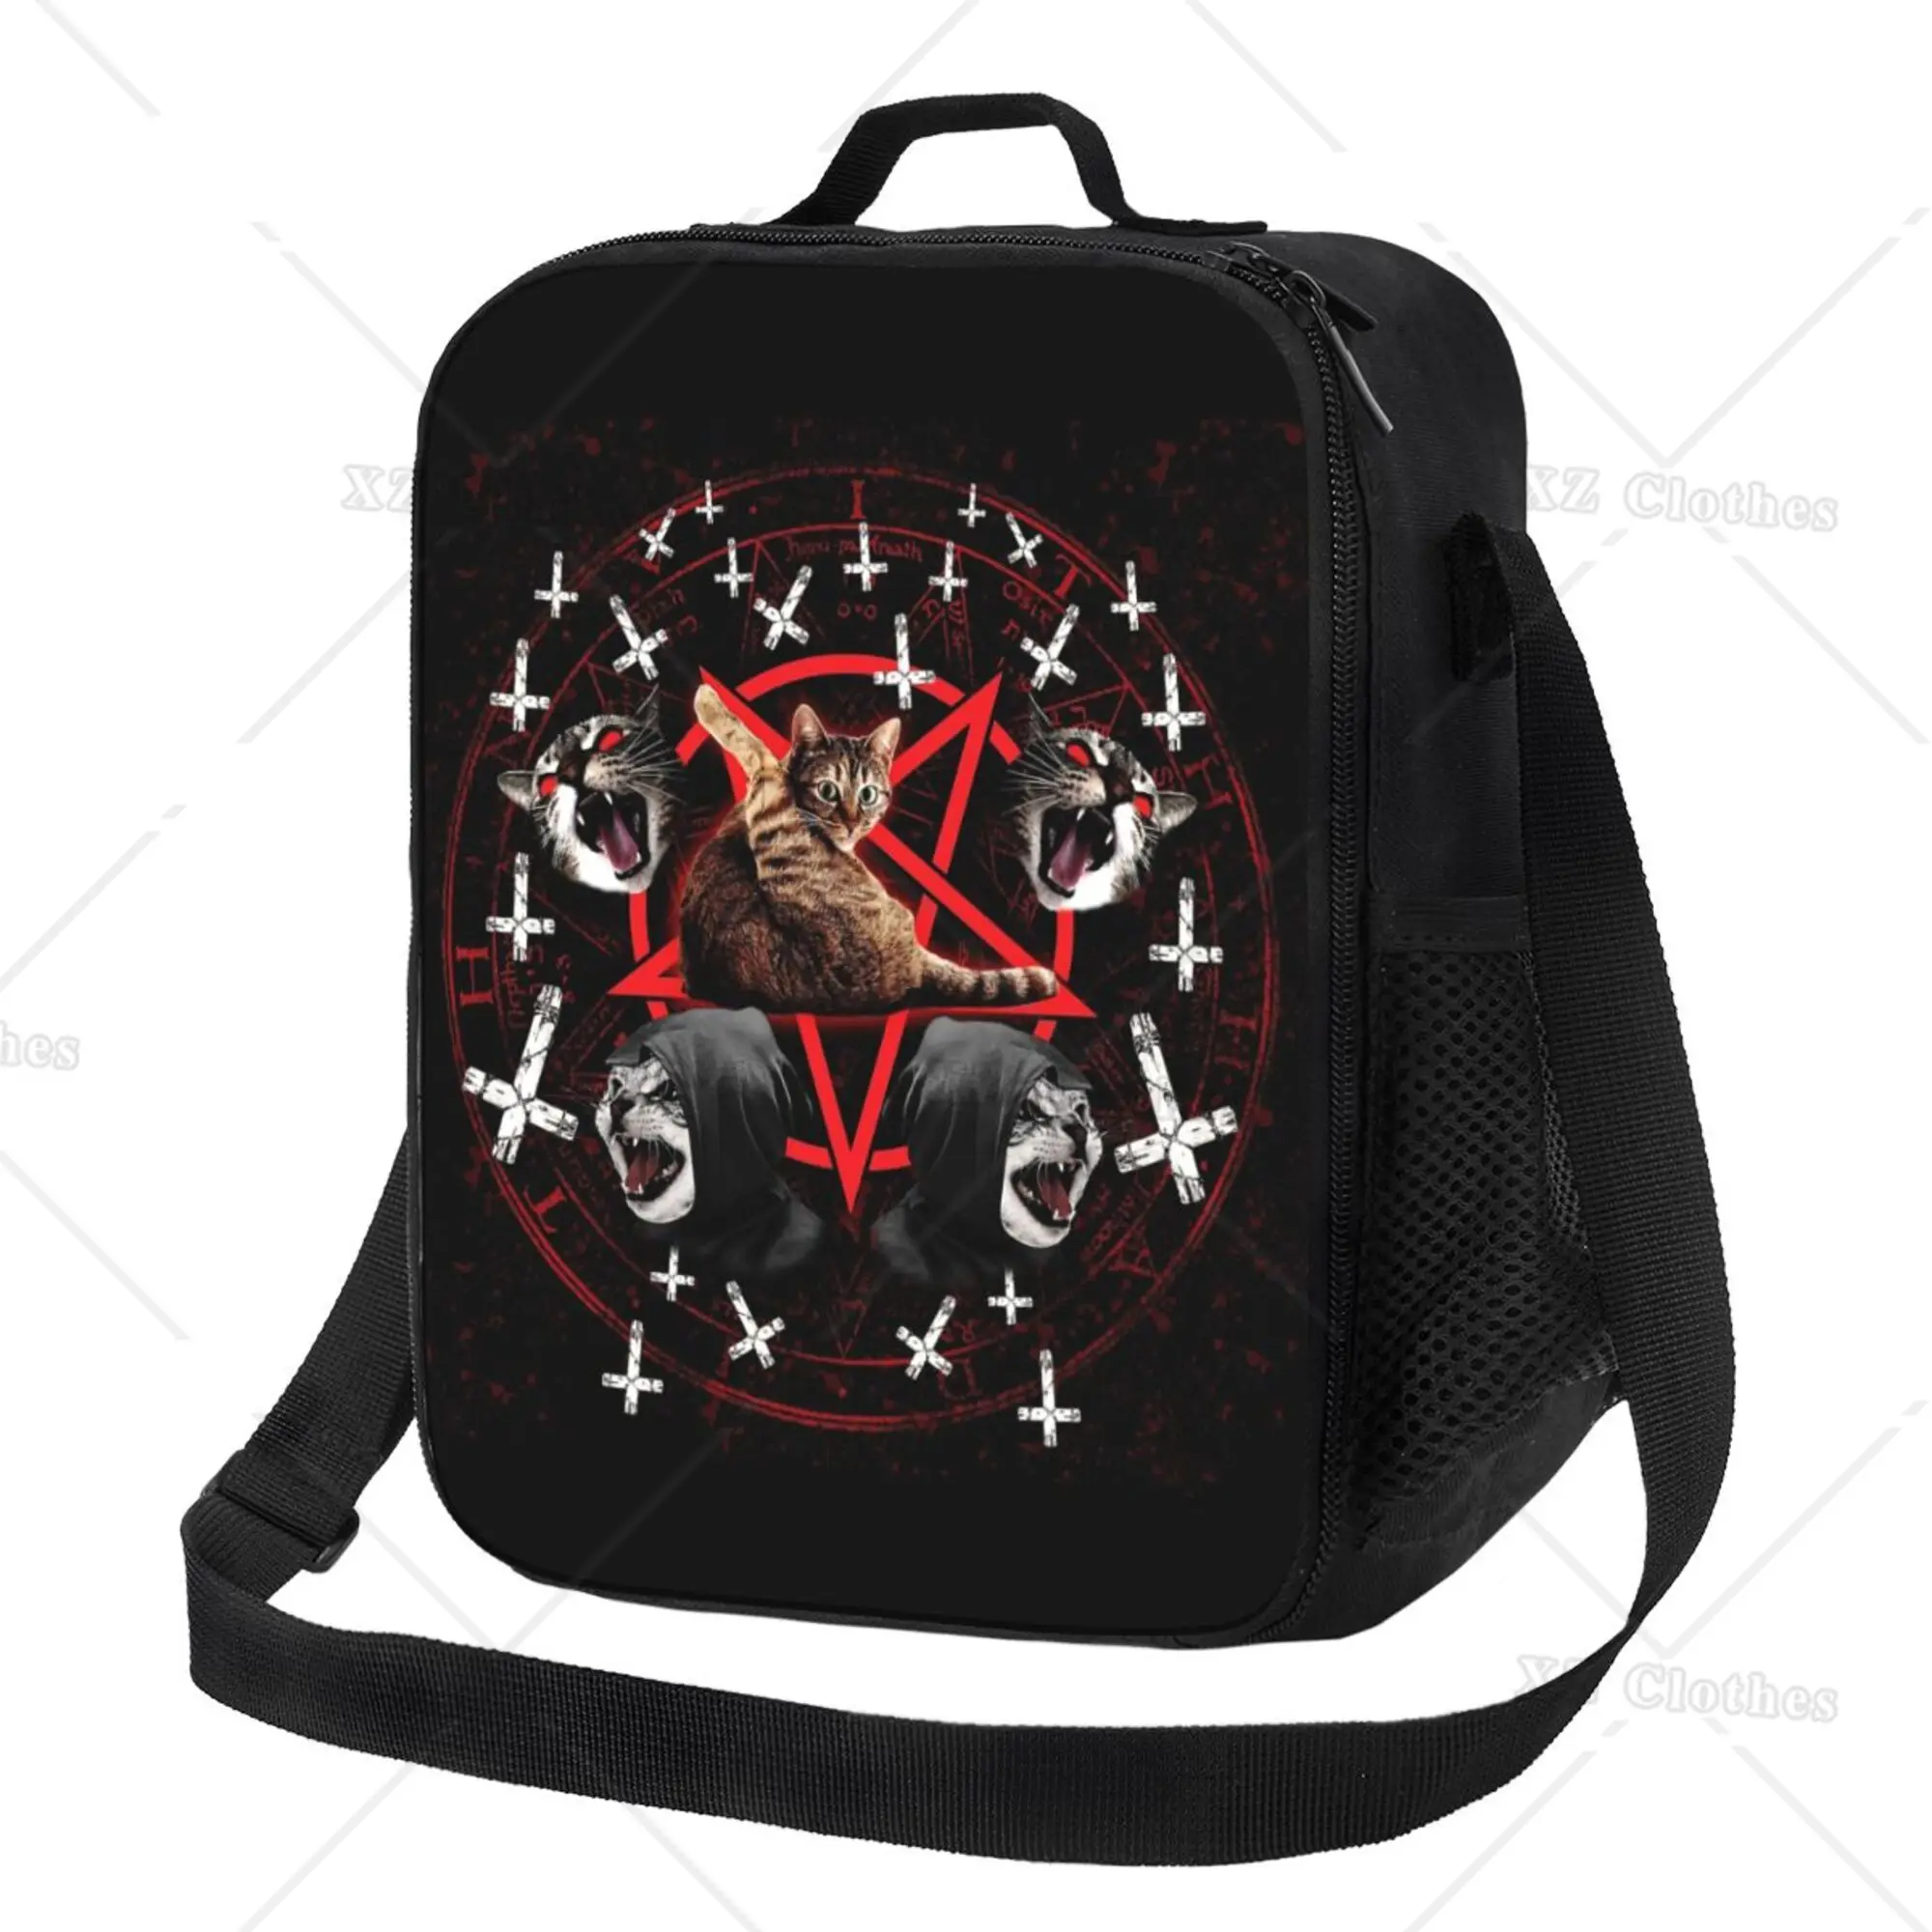 

Pentagram Satanic Cats Death Black Metal Band Lunch Bags Portable Insulated Lunch Box Tote Bag for Men Women School Work Picnic